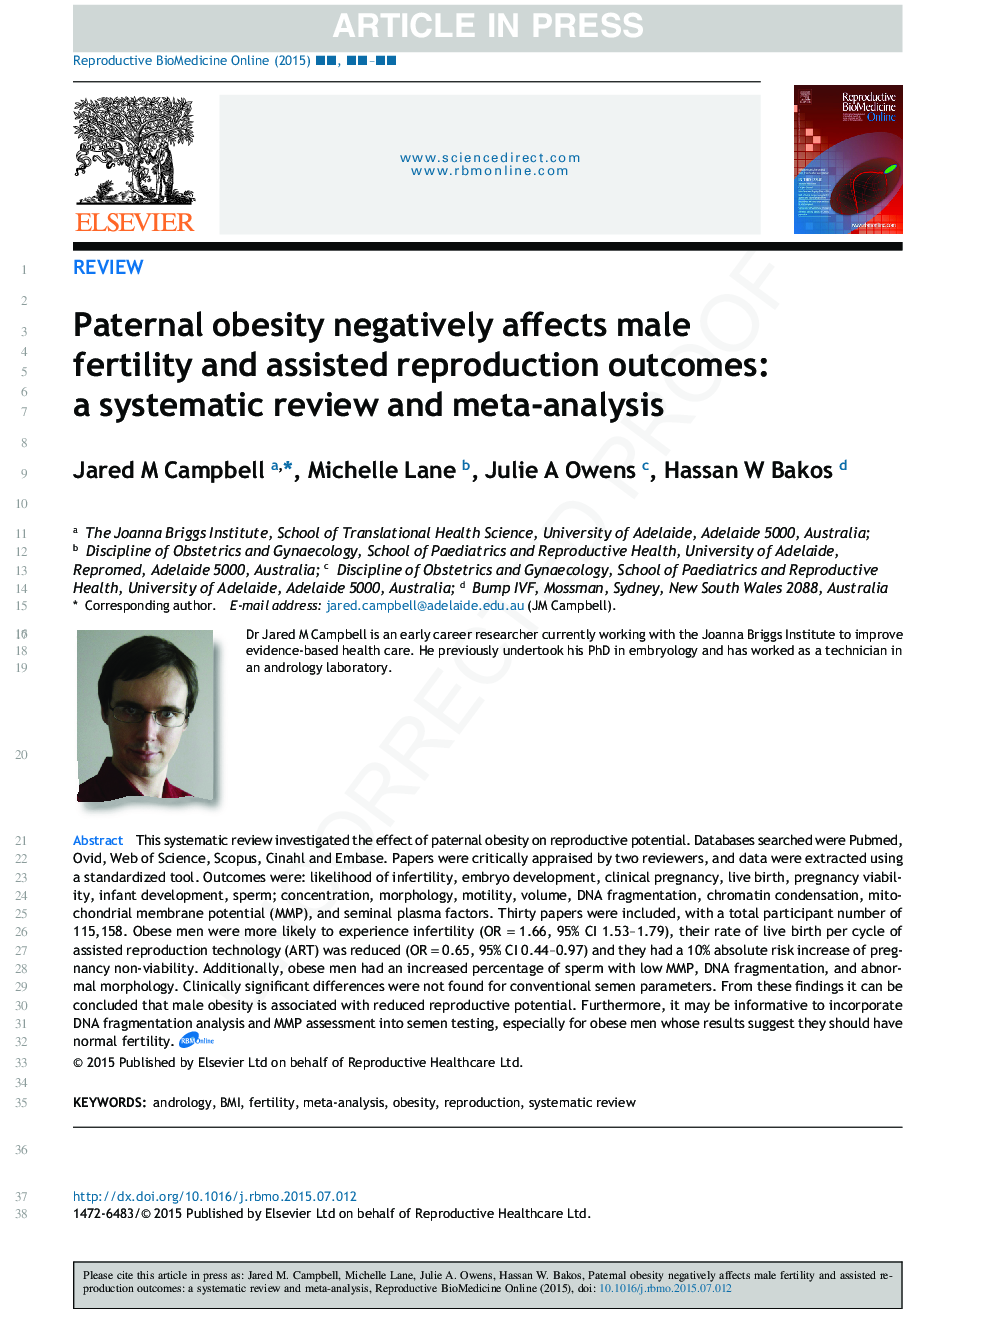 Paternal obesity negatively affects male fertility and assisted reproduction outcomes: a systematic review and meta-analysis